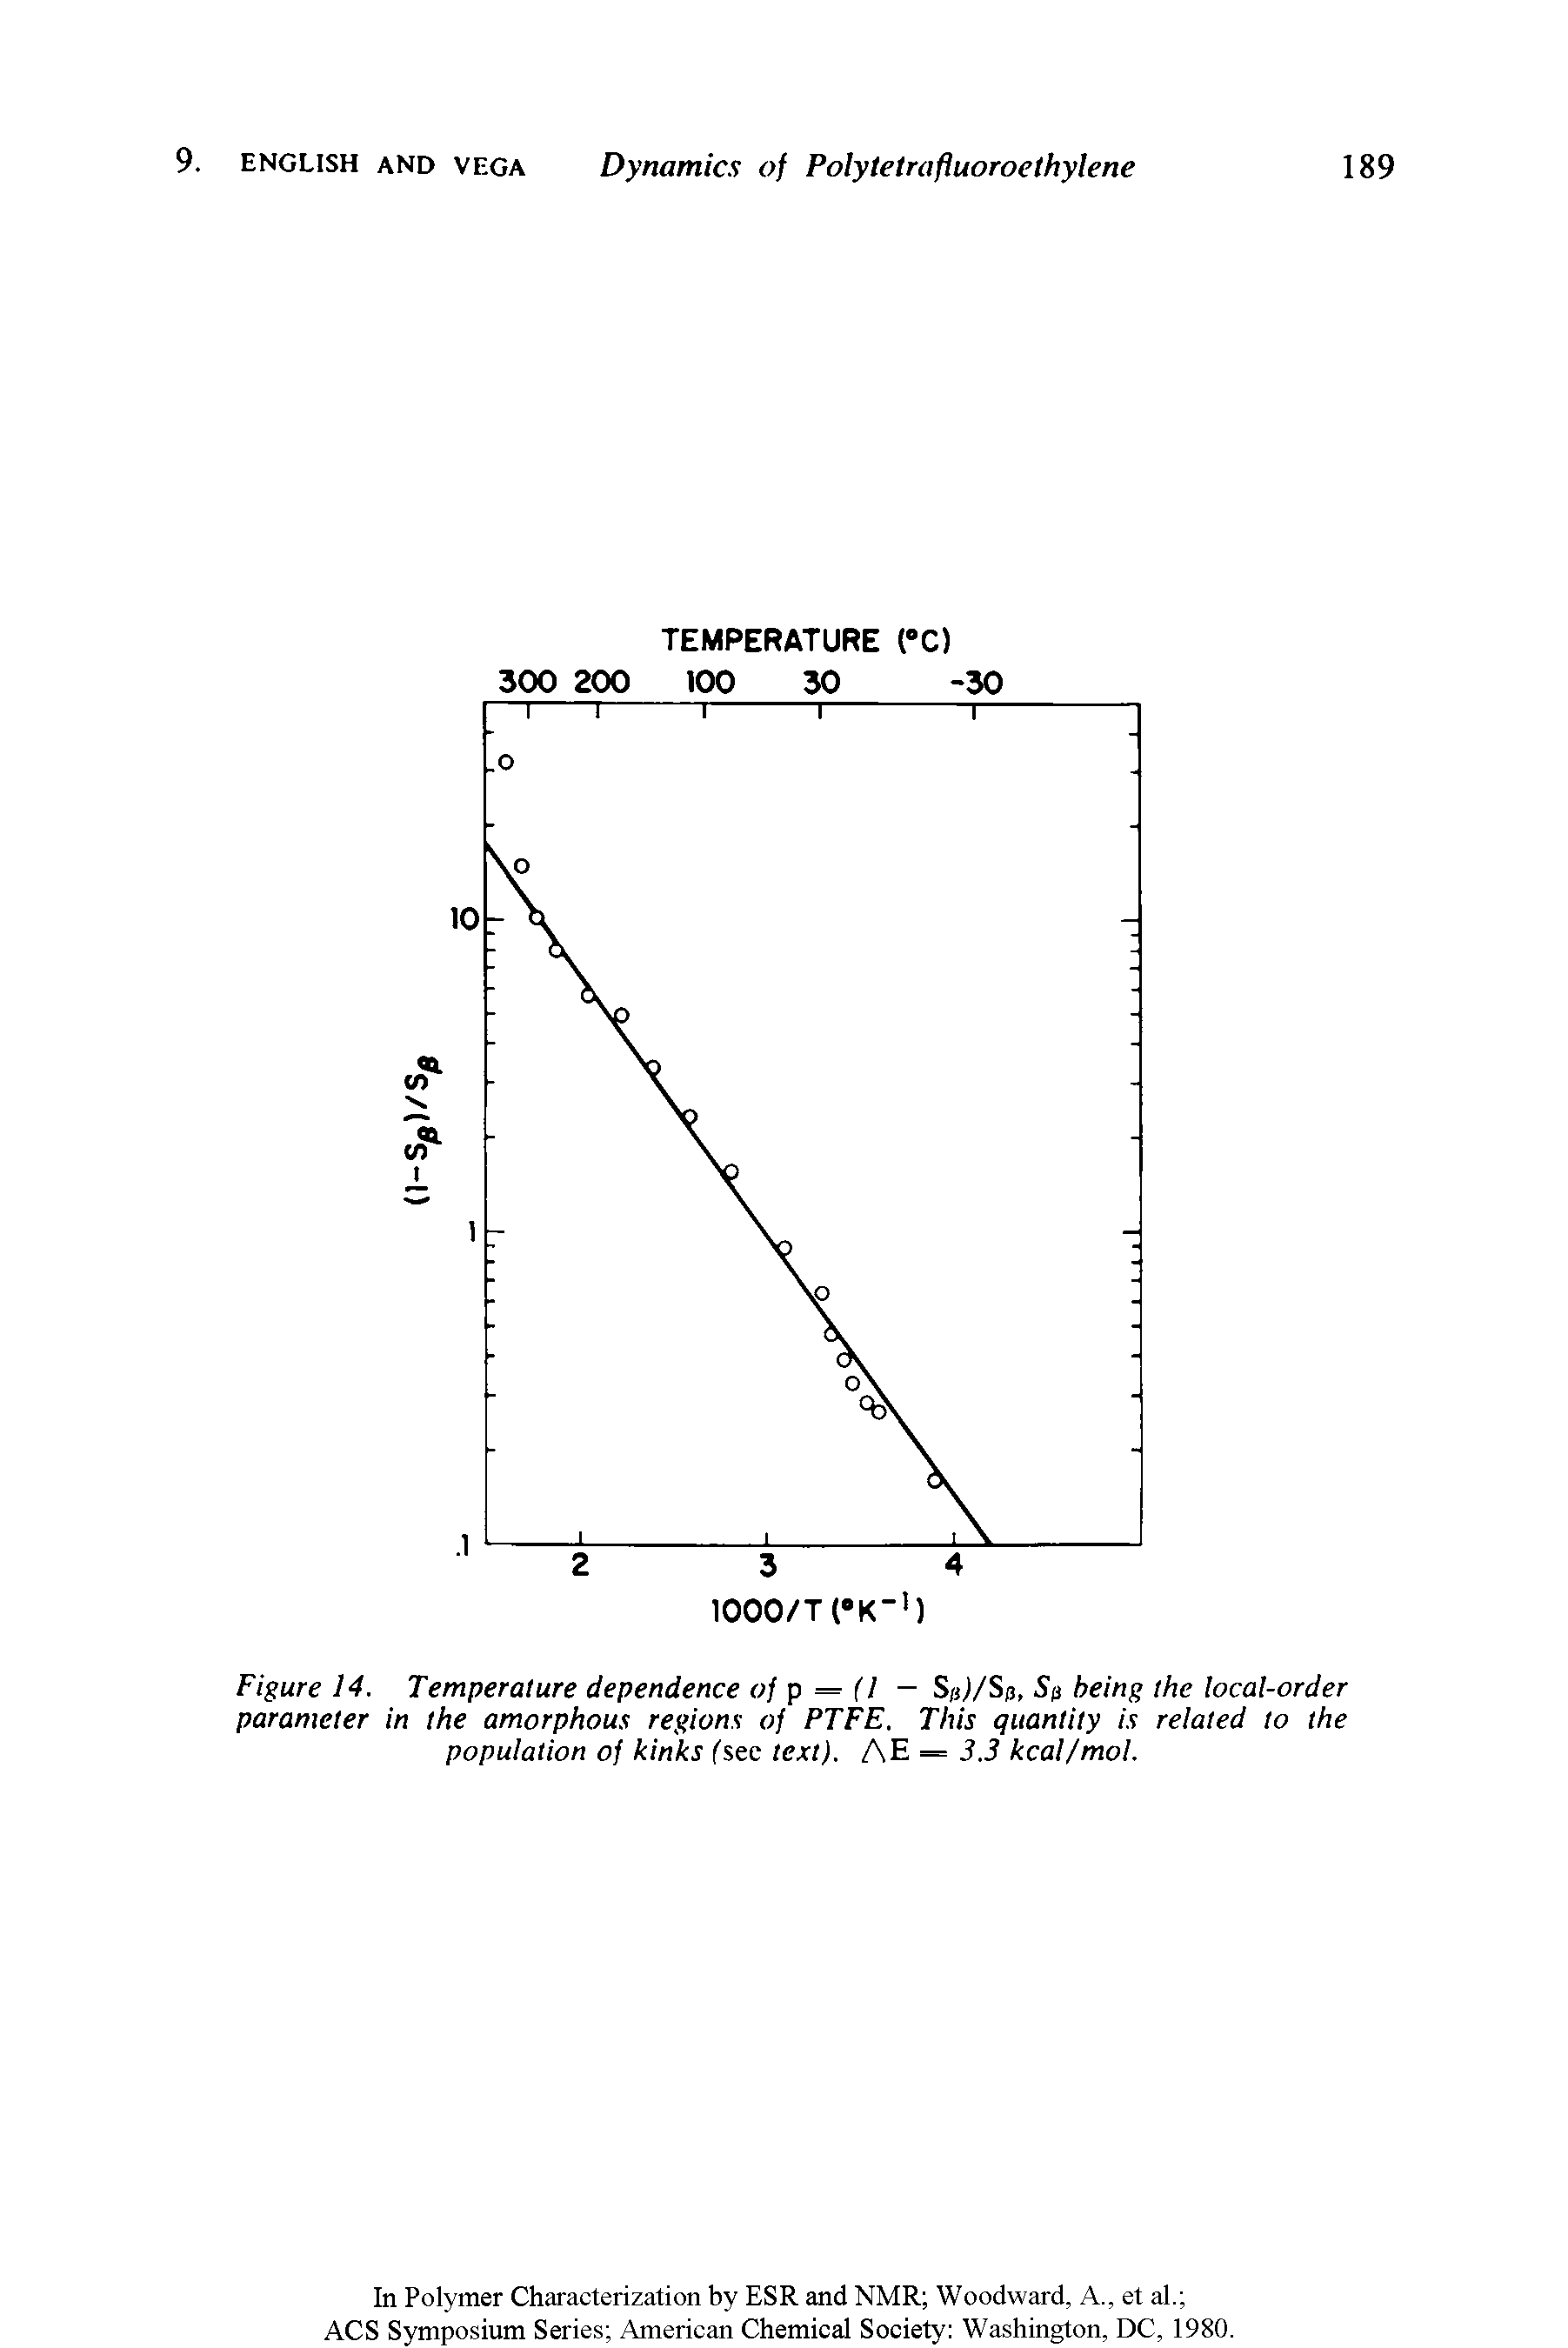 Figure 14. Temperature dependence of p = (1 — Spj/Sp, Sp being the local-order parameter in the amorphous regions of PTFE. This quantity is related to the population of kinks (sec text). AE = 3.3 kcal/mol.